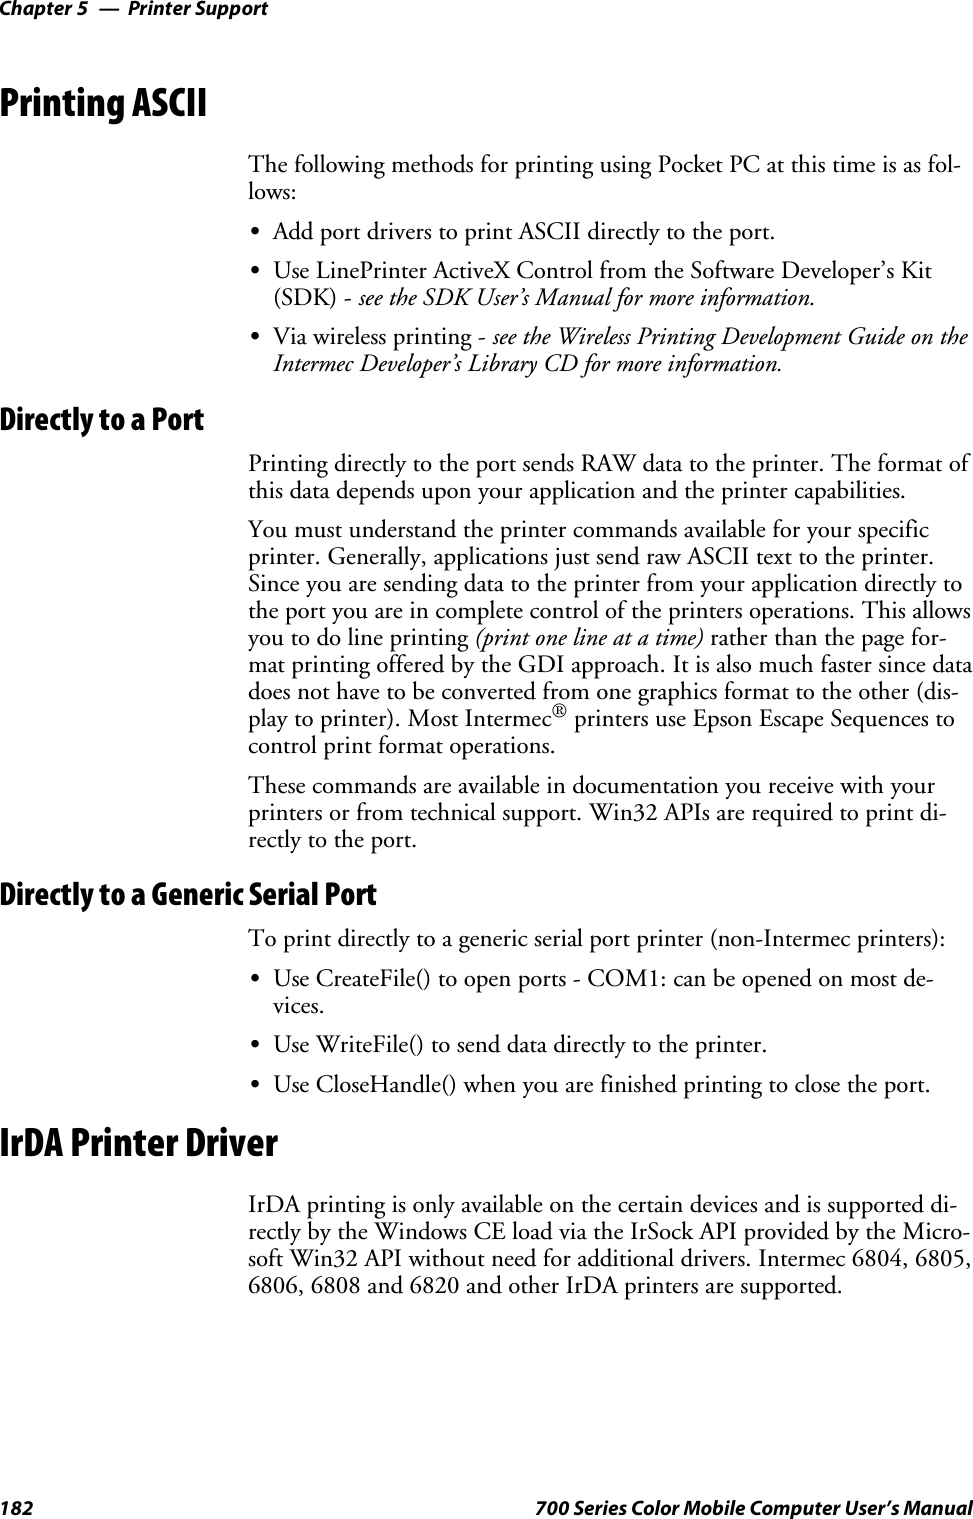 Printer SupportChapter —5182 700 Series Color Mobile Computer User’s ManualPrinting ASCIIThe following methods for printing using Pocket PC at this time is as fol-lows:SAdd port drivers to print ASCII directly to the port.SUse LinePrinter ActiveX Control from the Software Developer’s Kit(SDK) - see the SDK User’s Manual for more information.SVia wireless printing - see the Wireless Printing Development Guide on theIntermec Developer’s Library CD for more information.Directly to a PortPrinting directly to the port sends RAW data to the printer. The format ofthis data depends upon your application and the printer capabilities.You must understand the printer commands available for your specificprinter. Generally, applications just send raw ASCII text to the printer.Since you are sending data to the printer from your application directly tothe port you are in complete control of the printers operations. This allowsyoutodolineprinting(print one line at a time) rather than the page for-mat printing offered by the GDI approach. It is also much faster since datadoes not have to be converted from one graphics format to the other (dis-play to printer). Most Intermec®printers use Epson Escape Sequences tocontrol print format operations.These commands are available in documentation you receive with yourprinters or from technical support. Win32 APIs are required to print di-rectly to the port.Directly to a Generic Serial PortTo print directly to a generic serial port printer (non-Intermec printers):SUse CreateFile() to open ports - COM1: can be opened on most de-vices.SUse WriteFile() to send data directly to the printer.SUse CloseHandle() when you are finished printing to close the port.IrDA Printer DriverIrDA printing is only available on the certain devices and is supported di-rectly by the Windows CE load via the IrSock API provided by the Micro-soft Win32 API without need for additional drivers. Intermec 6804, 6805,6806, 6808 and 6820 and other IrDA printers are supported.